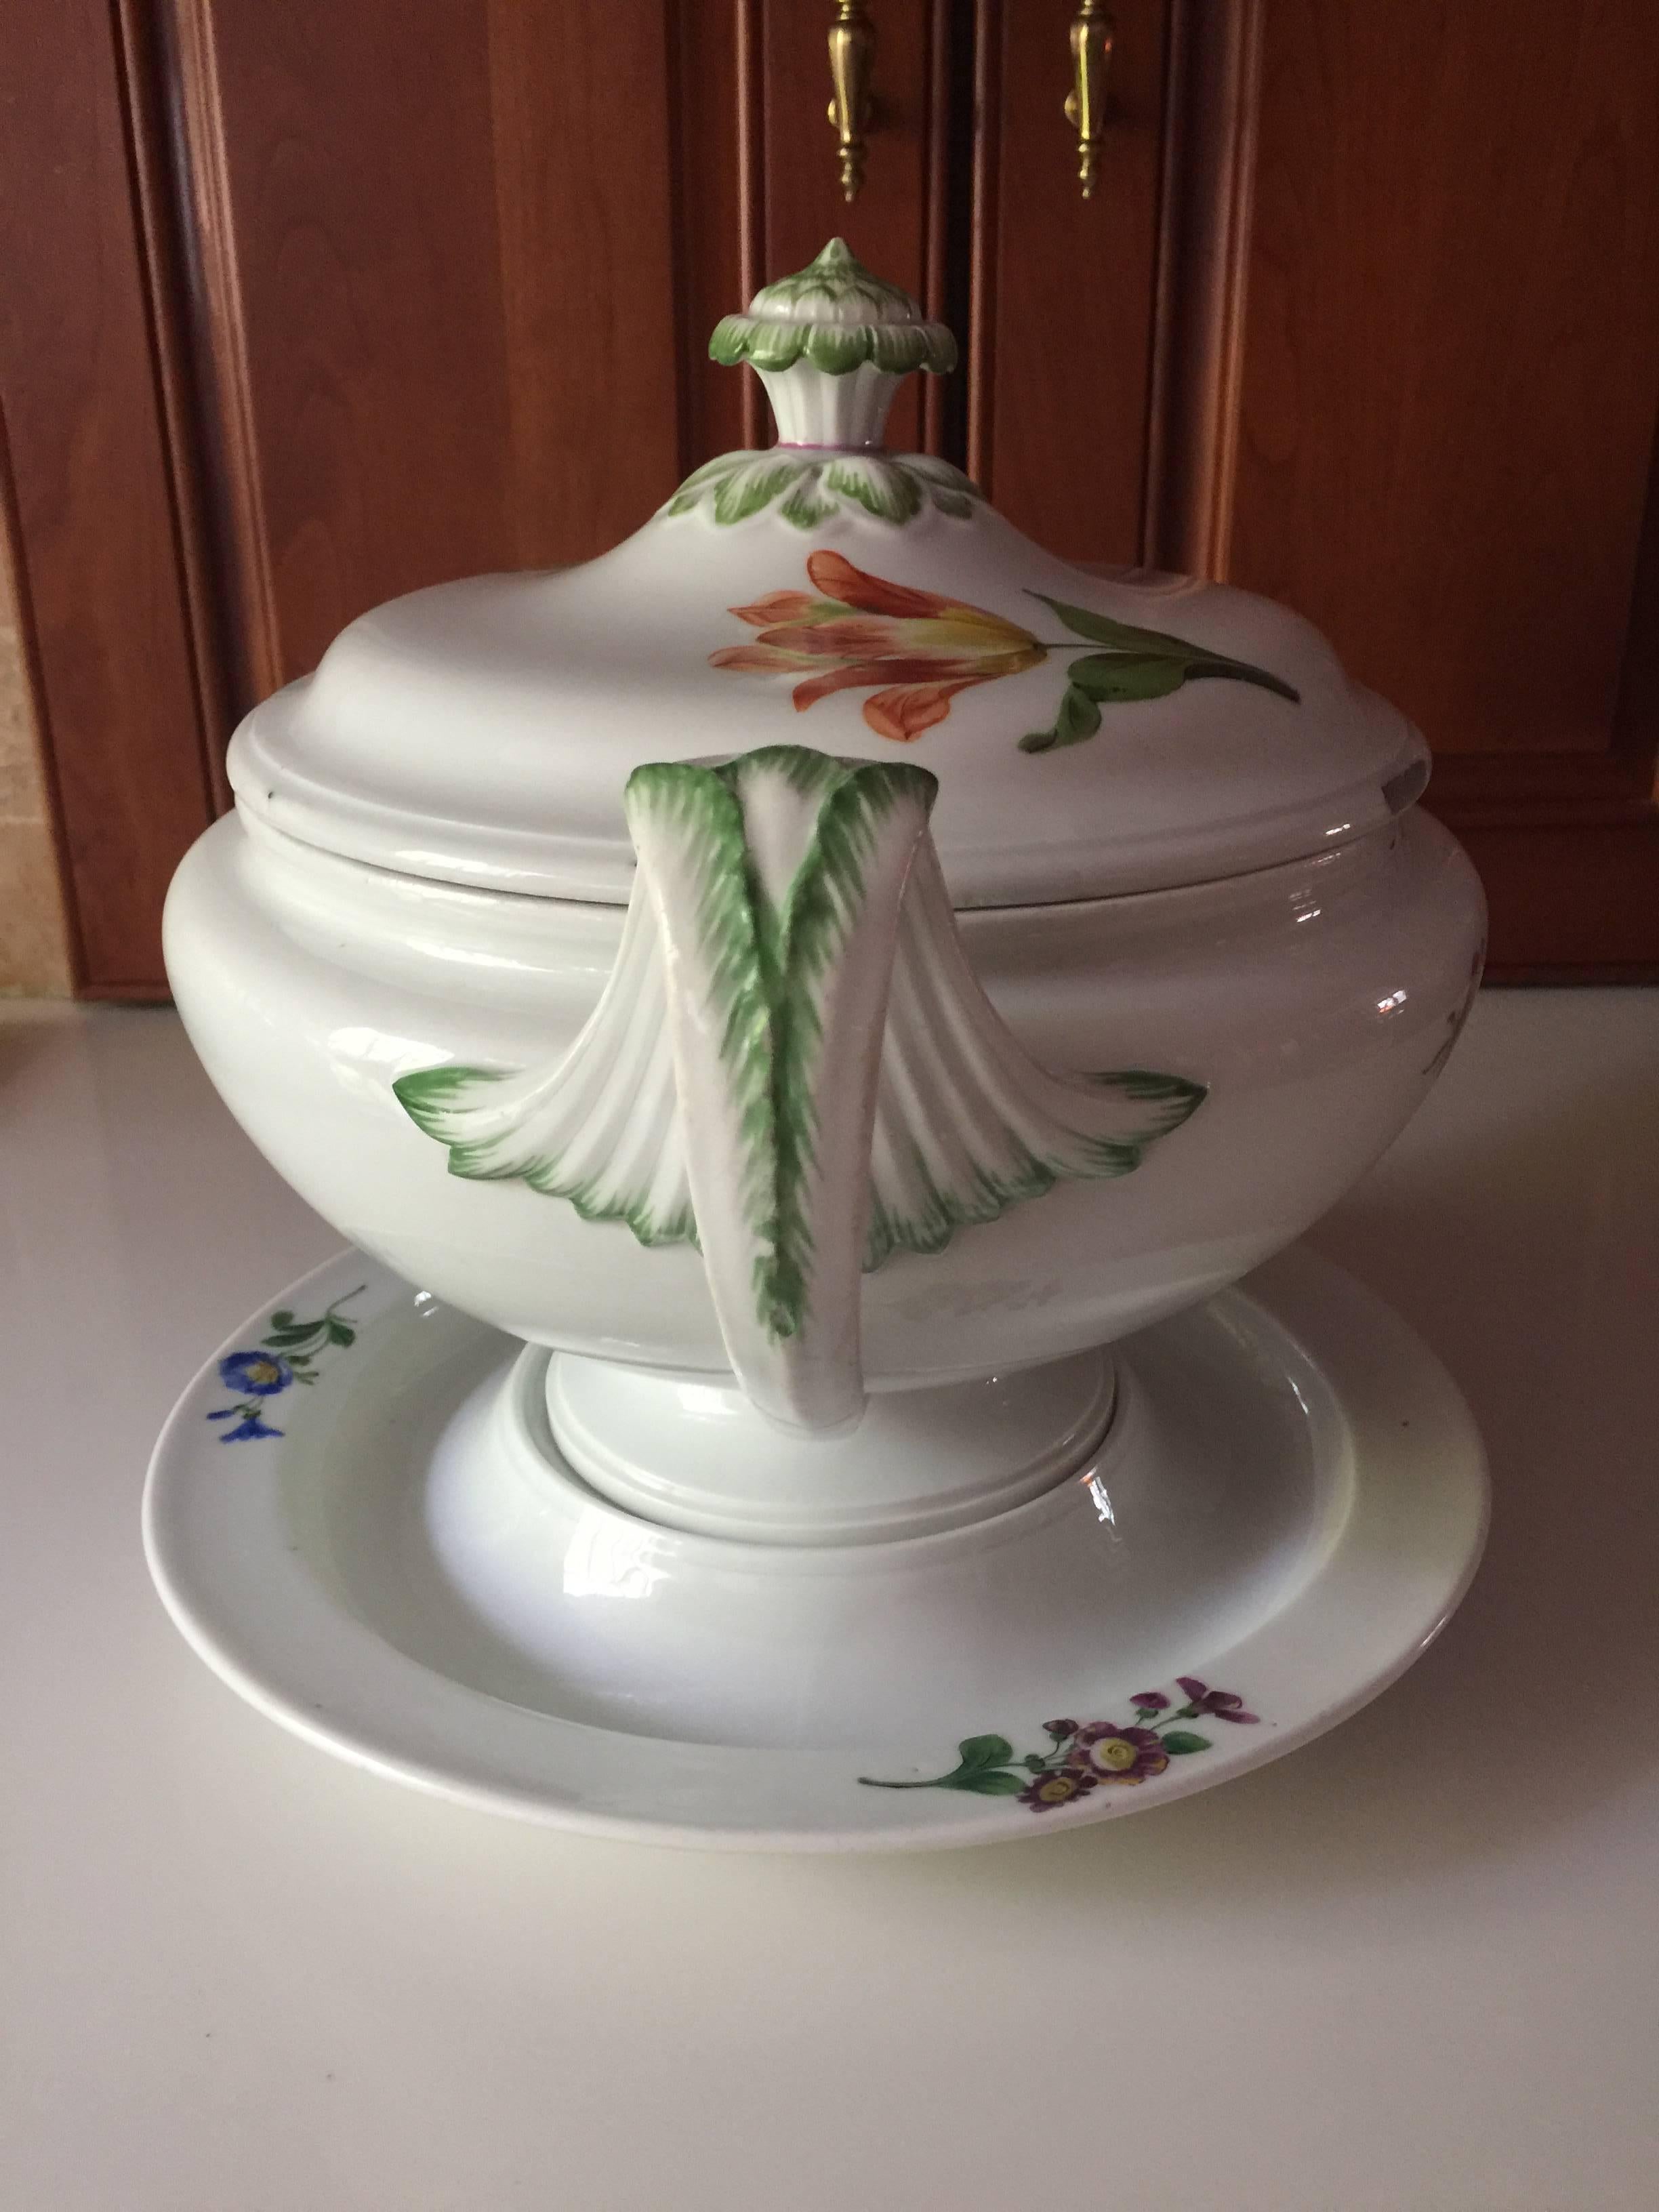 19th Century Large Meissen Hand-Painted Tureen on Stand In Good Condition For Sale In Washington Crossing, PA